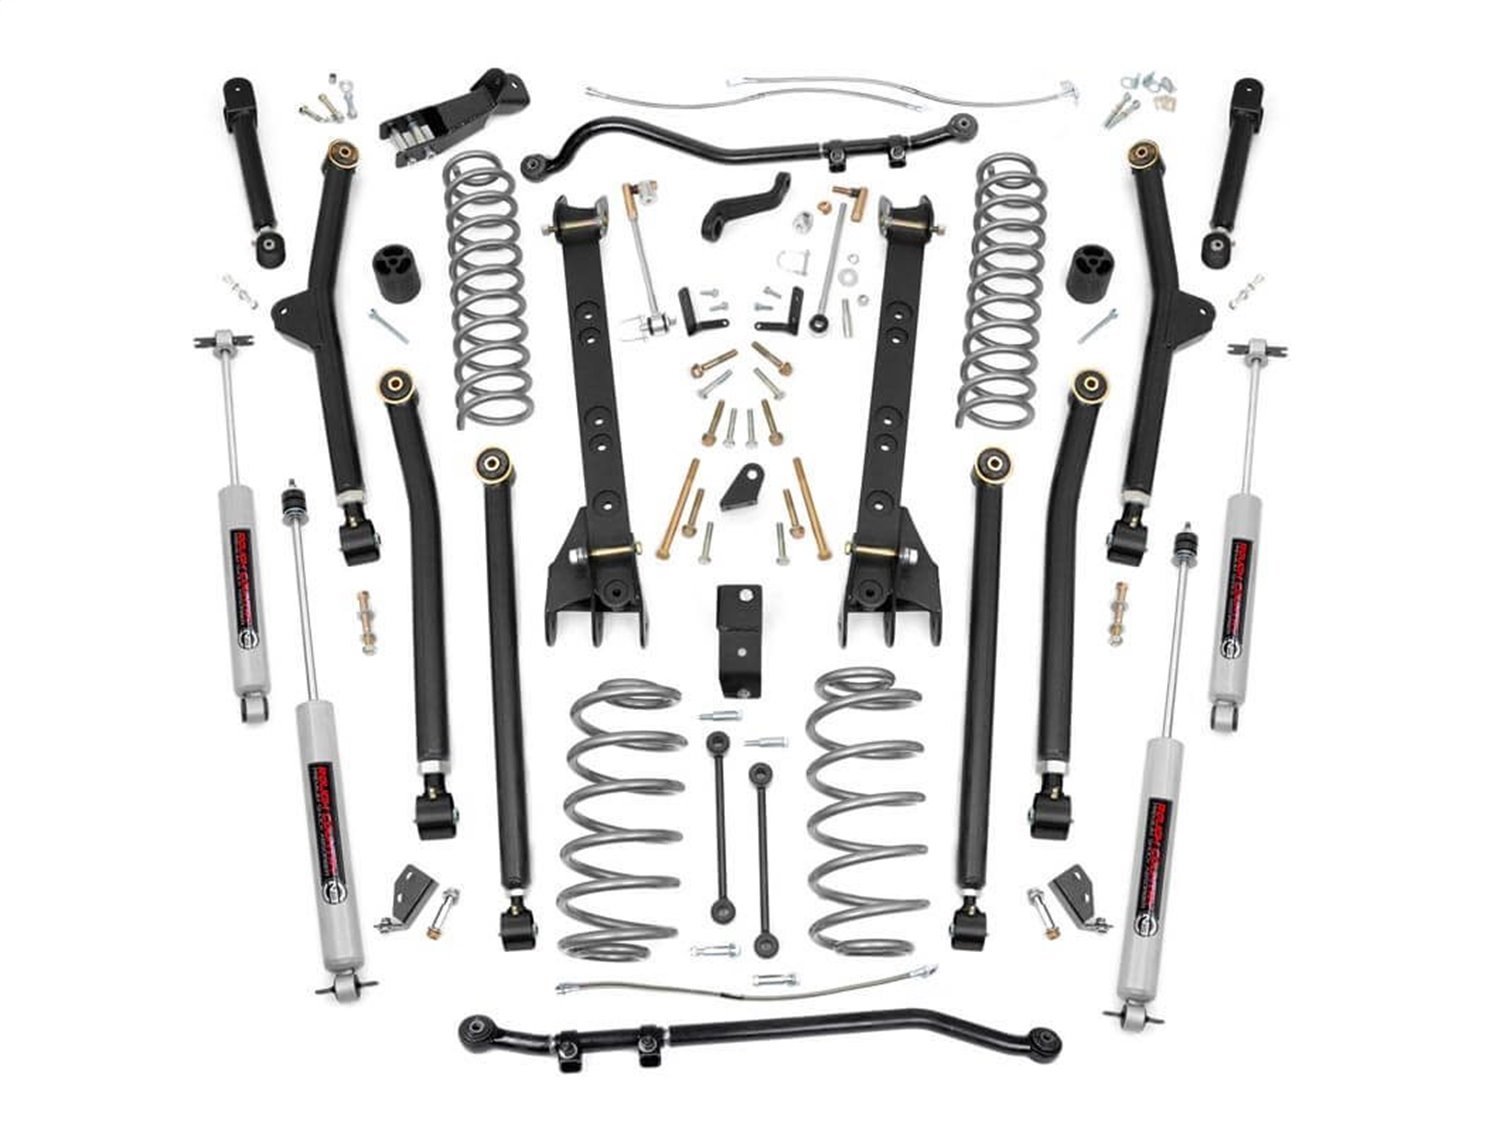 63122 6-inch X-Series Long Arm Suspension Lift System